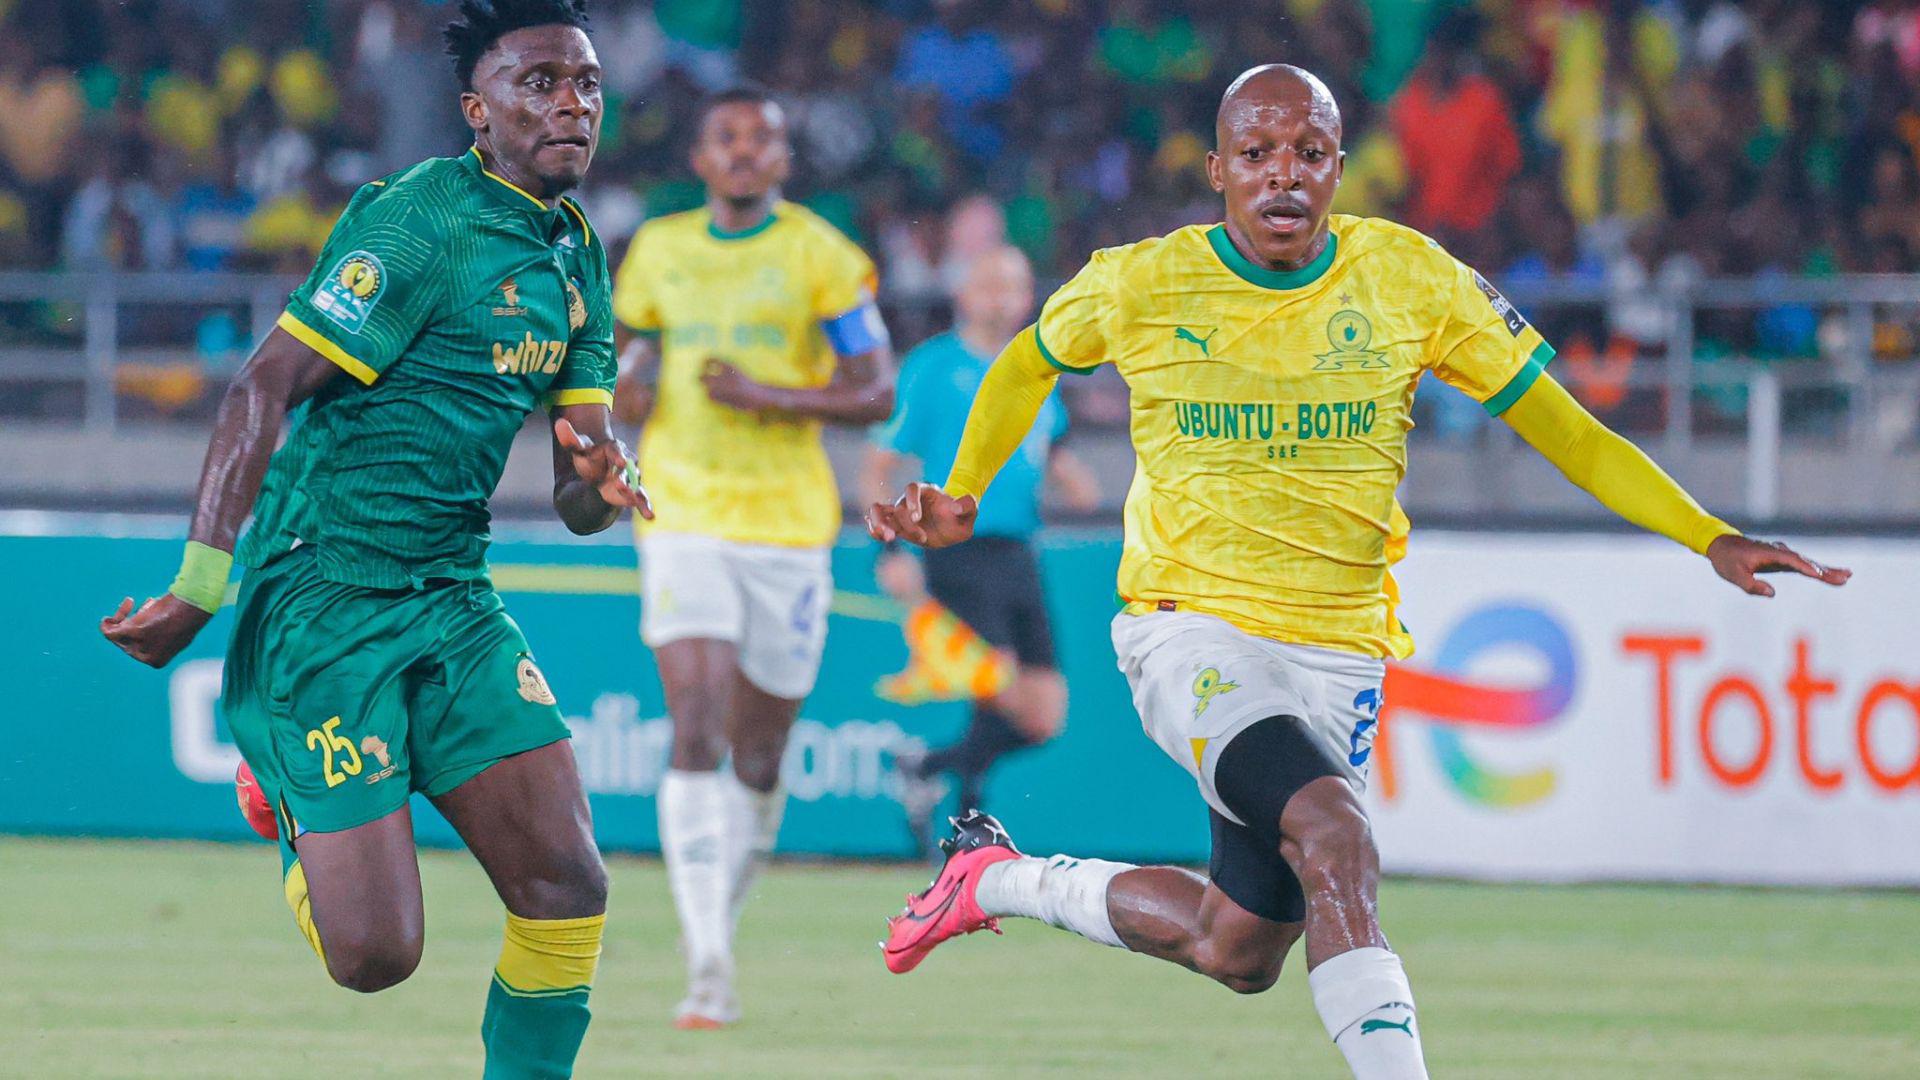 VIDEO | CAF Champions League Highlights: Young Africans (TZA) vs Mamelodi Sundowns (ZAF)